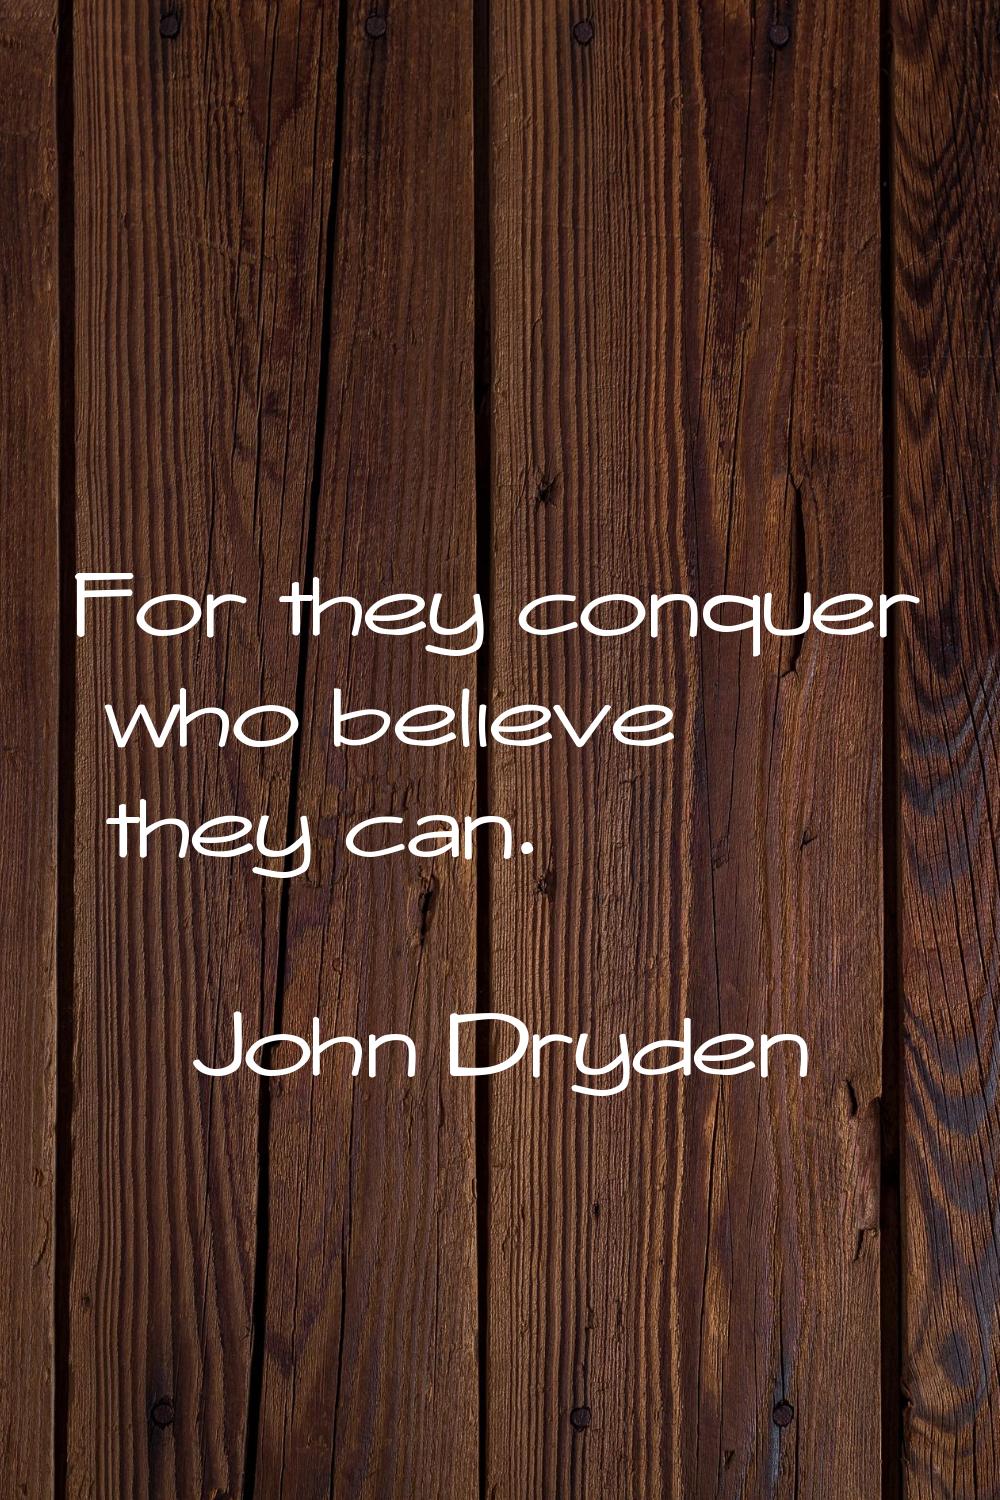 For they conquer who believe they can.